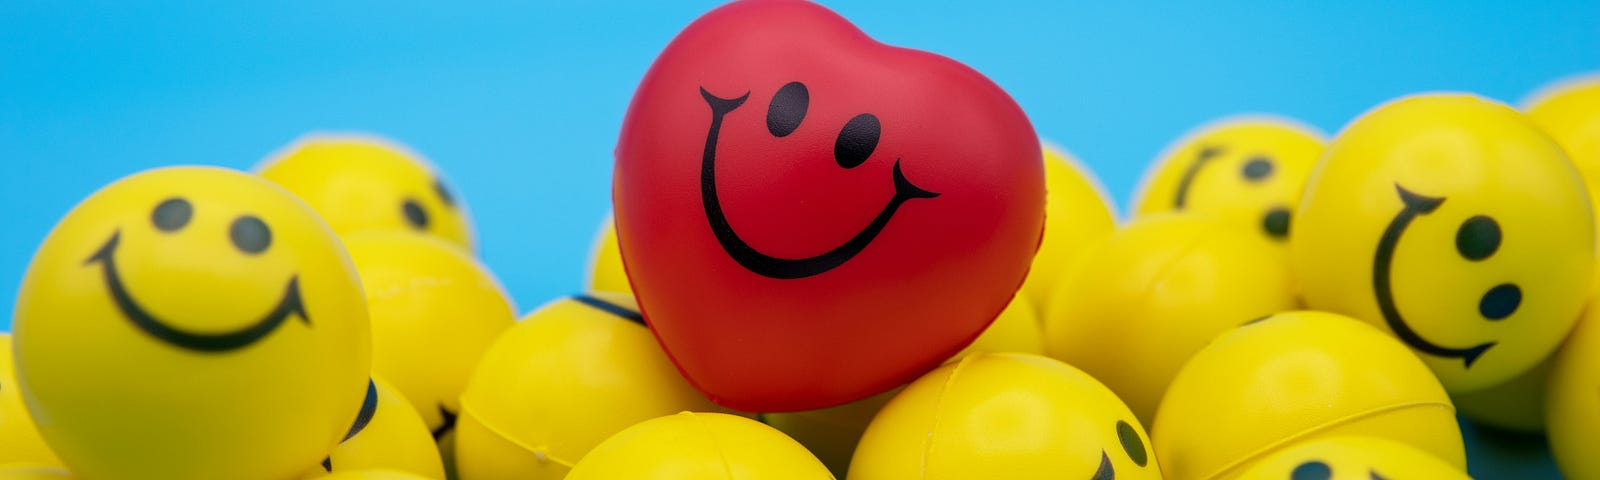 a pile of yellow smiley face balls with one red heart shaped ball on top